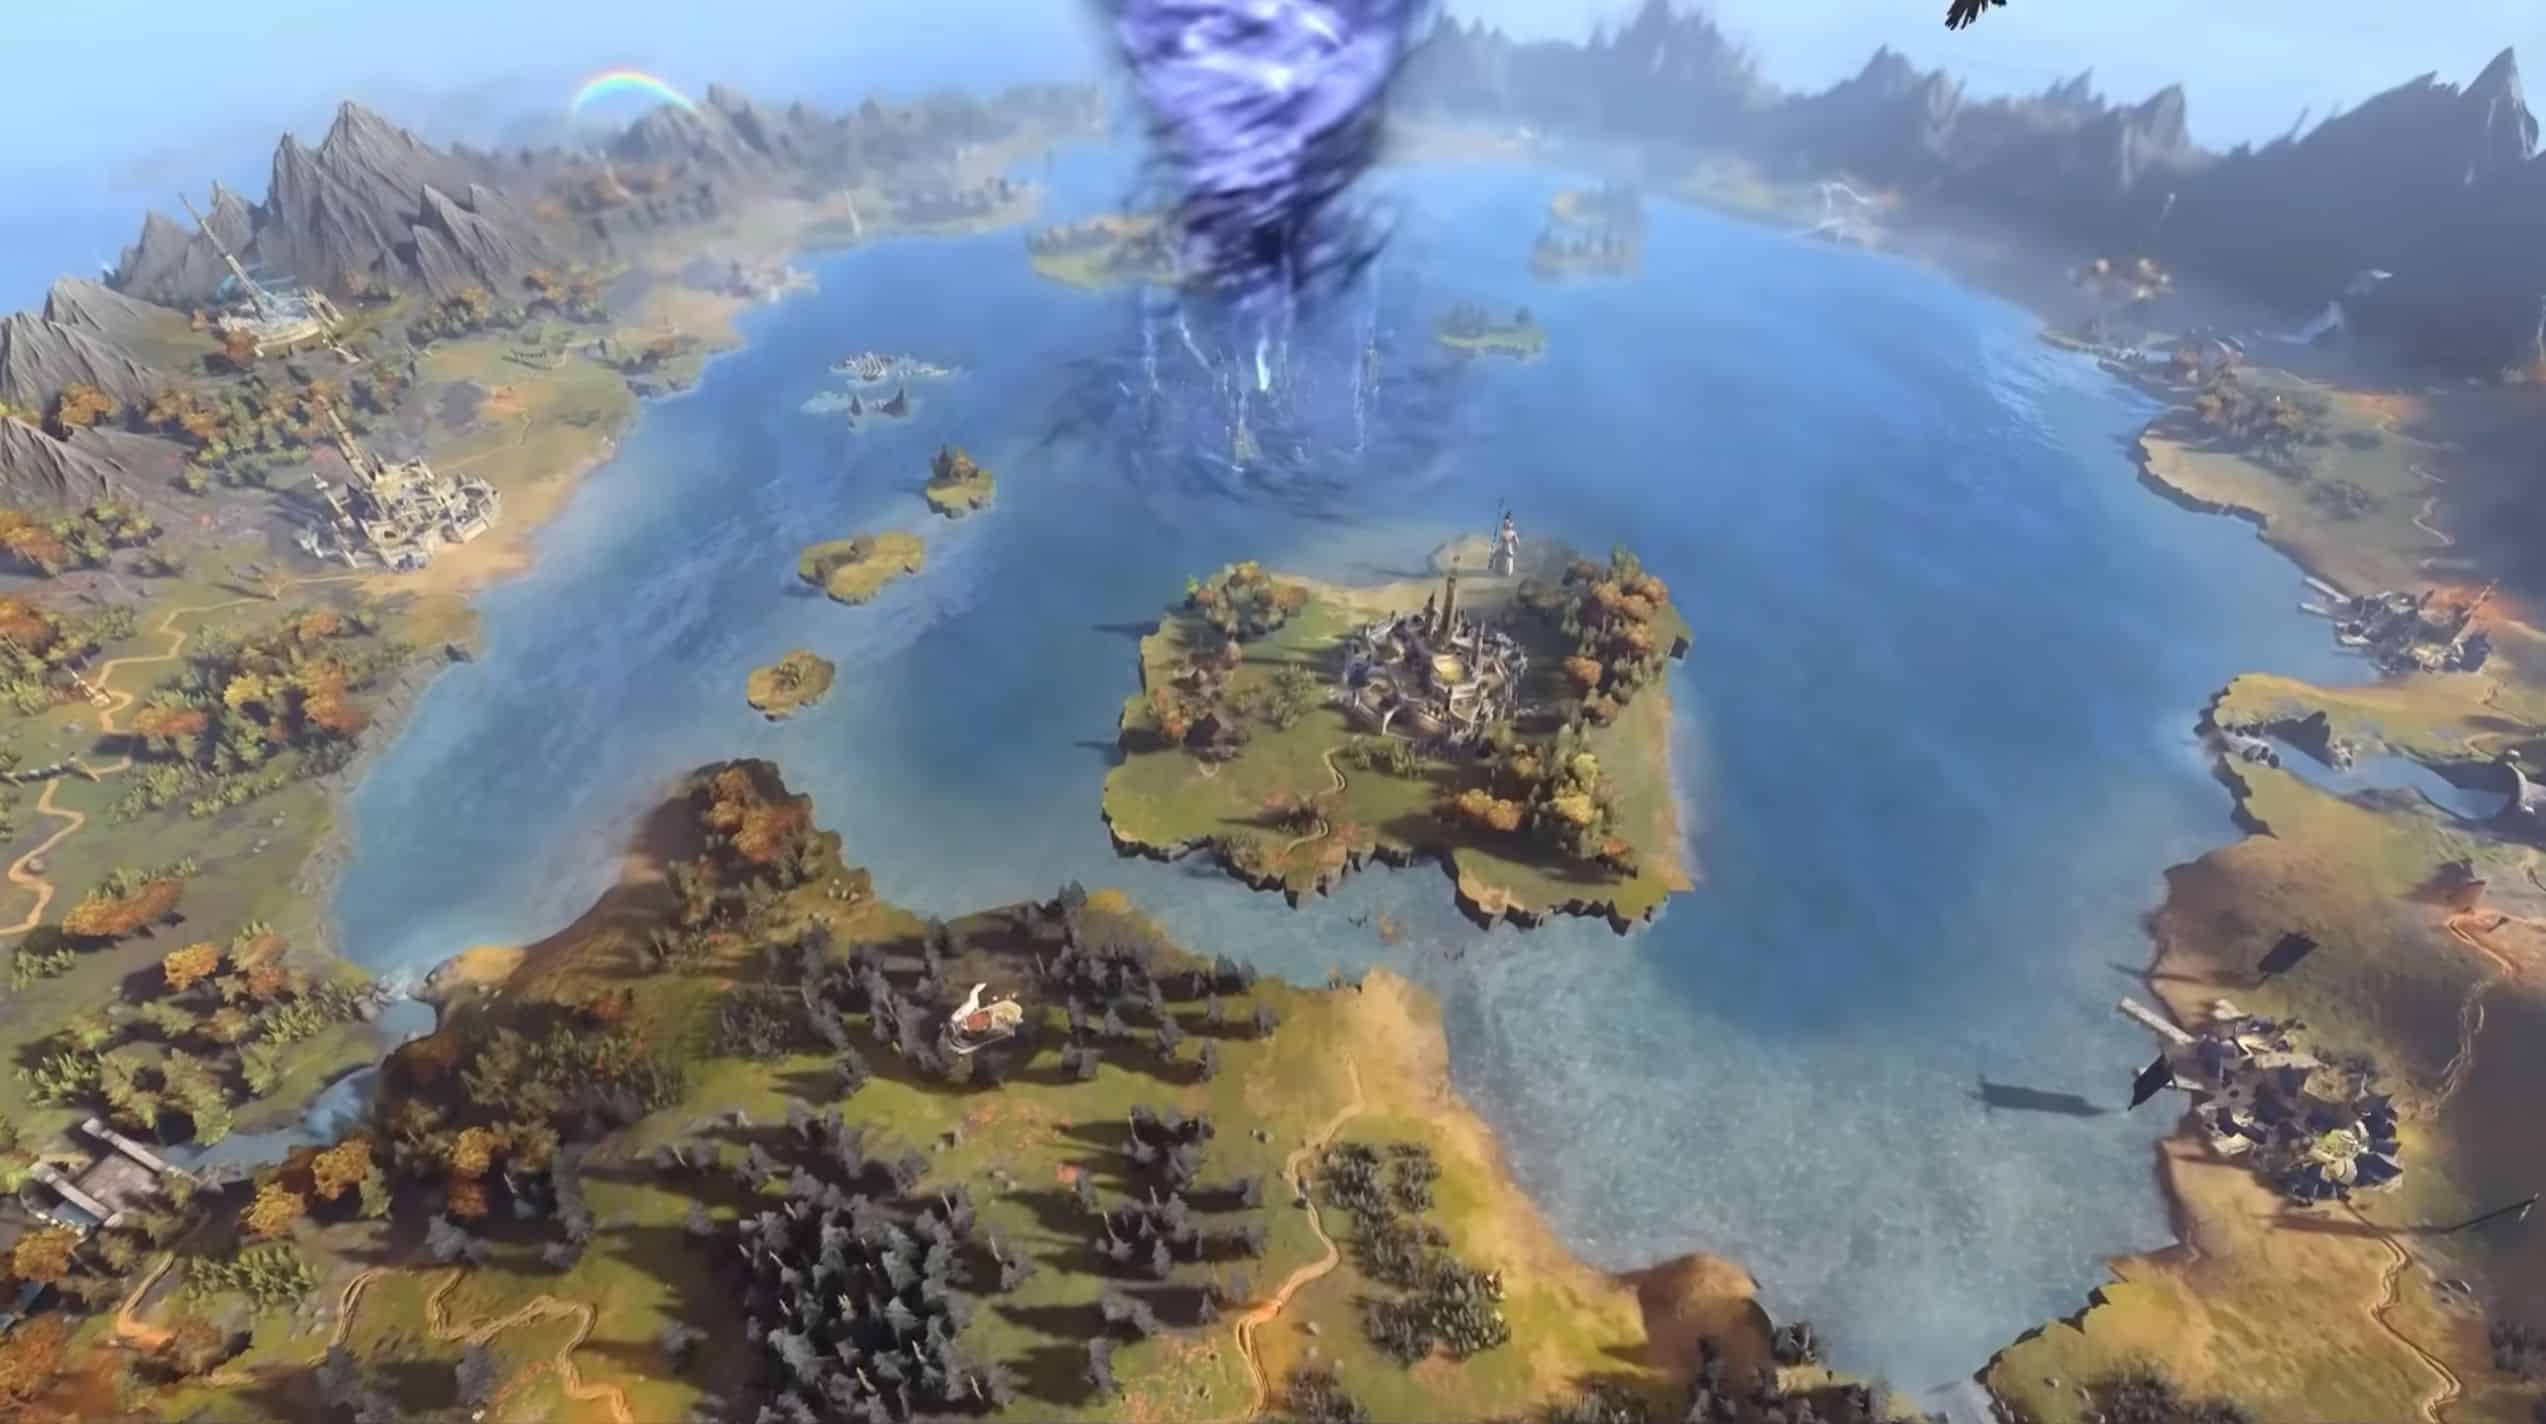 Warhammer 3: Trailer shows map of Immortal Empires - lasts "only" 13 minutes